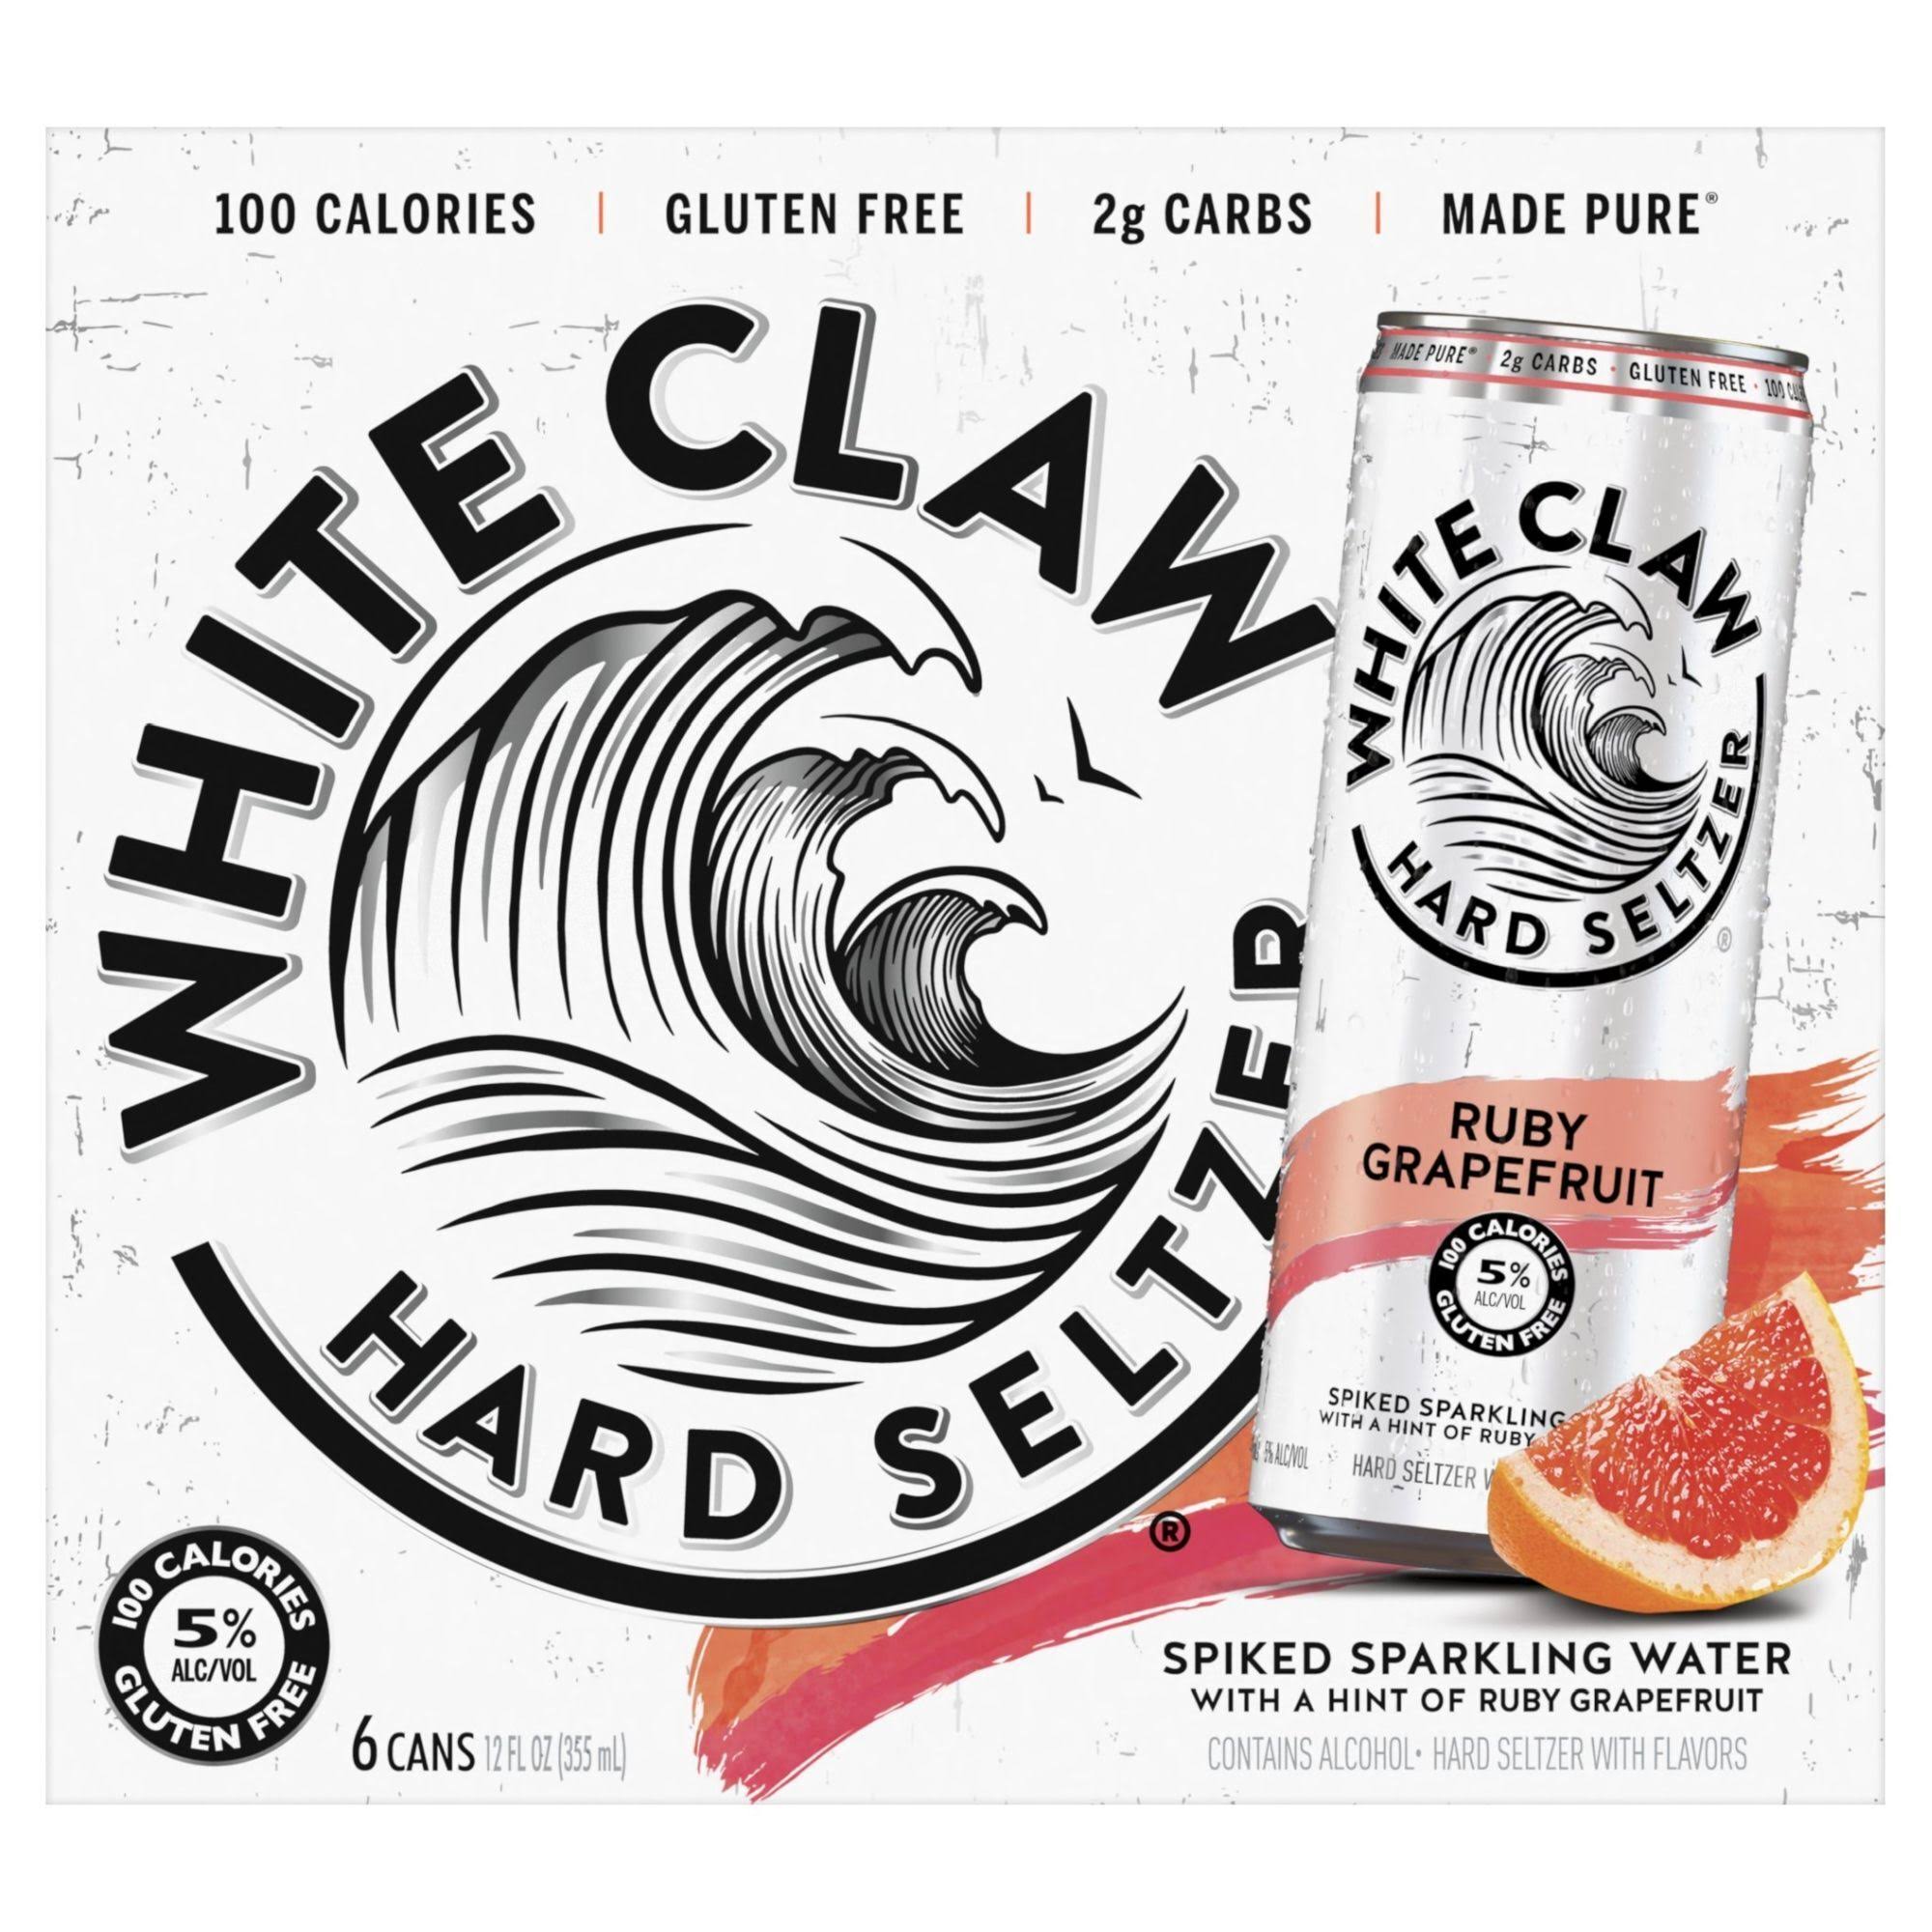 White Claw Sparkling Water - Ruby Grapefruit, 6 Cans